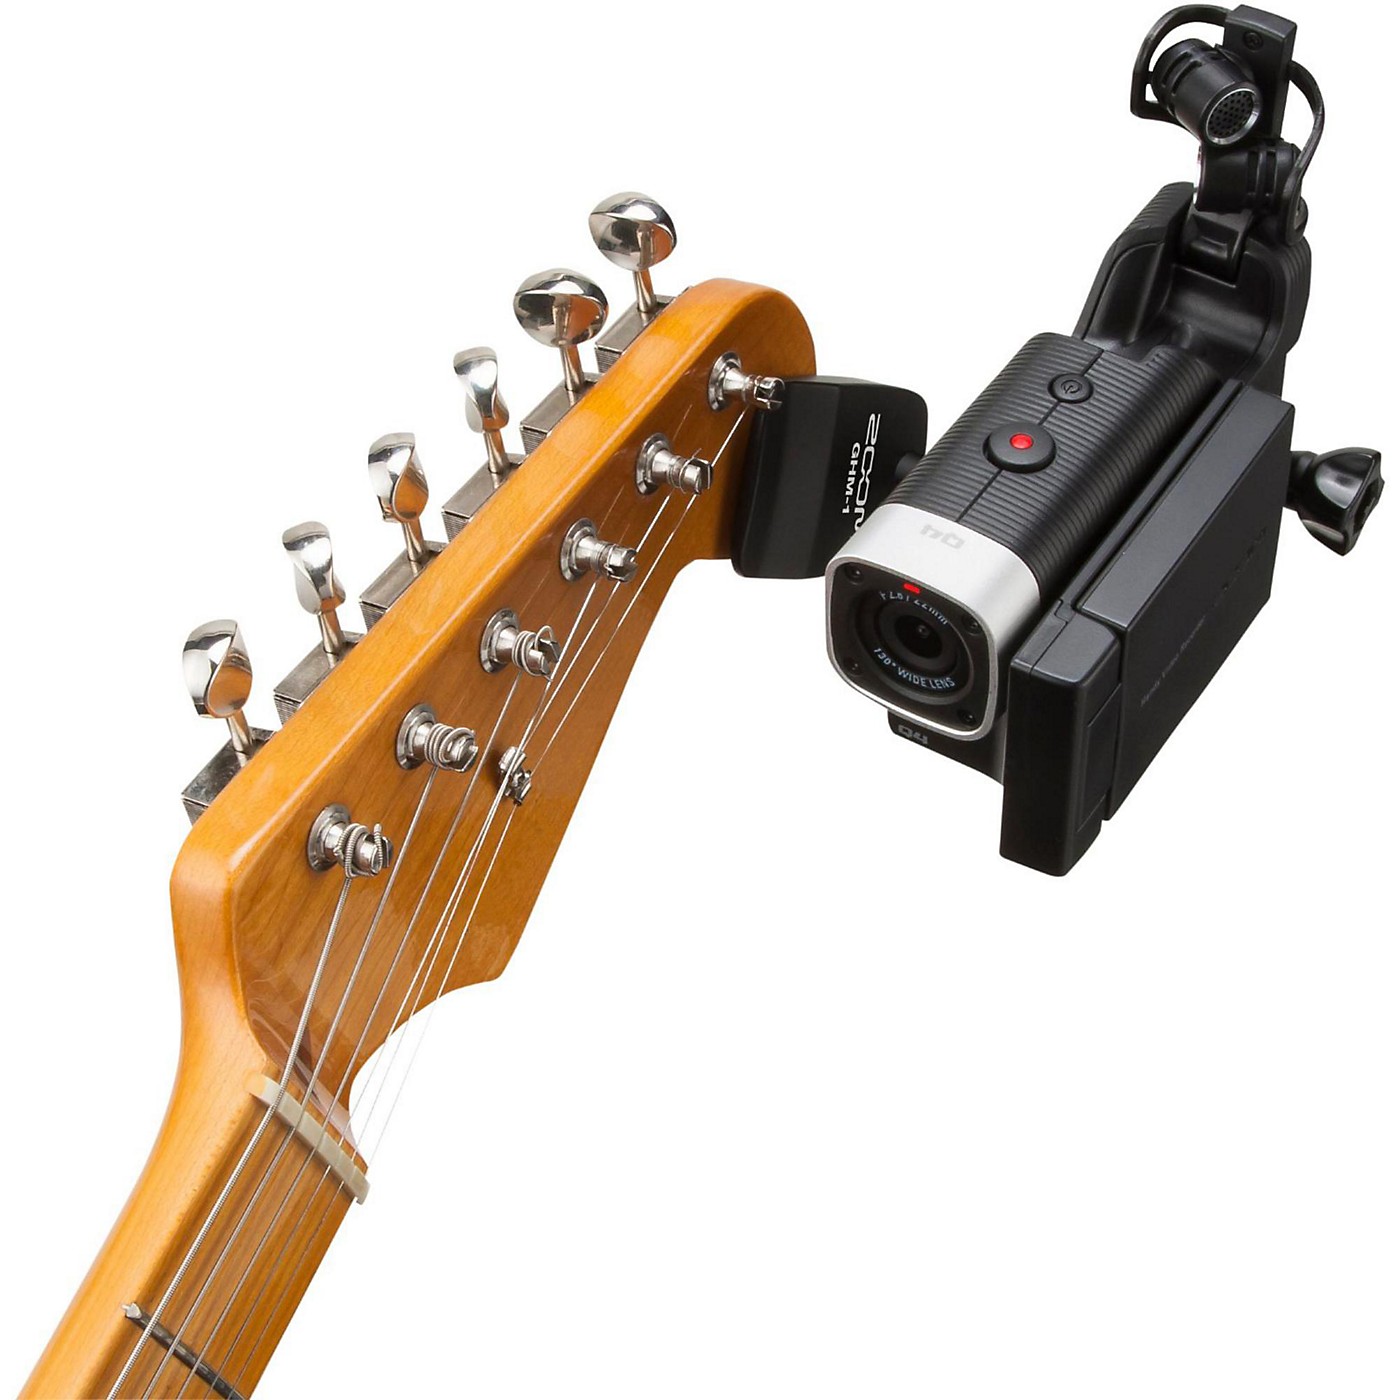 Zoom GHM-1 Guitar Headstock Mount for Action Cameras thumbnail